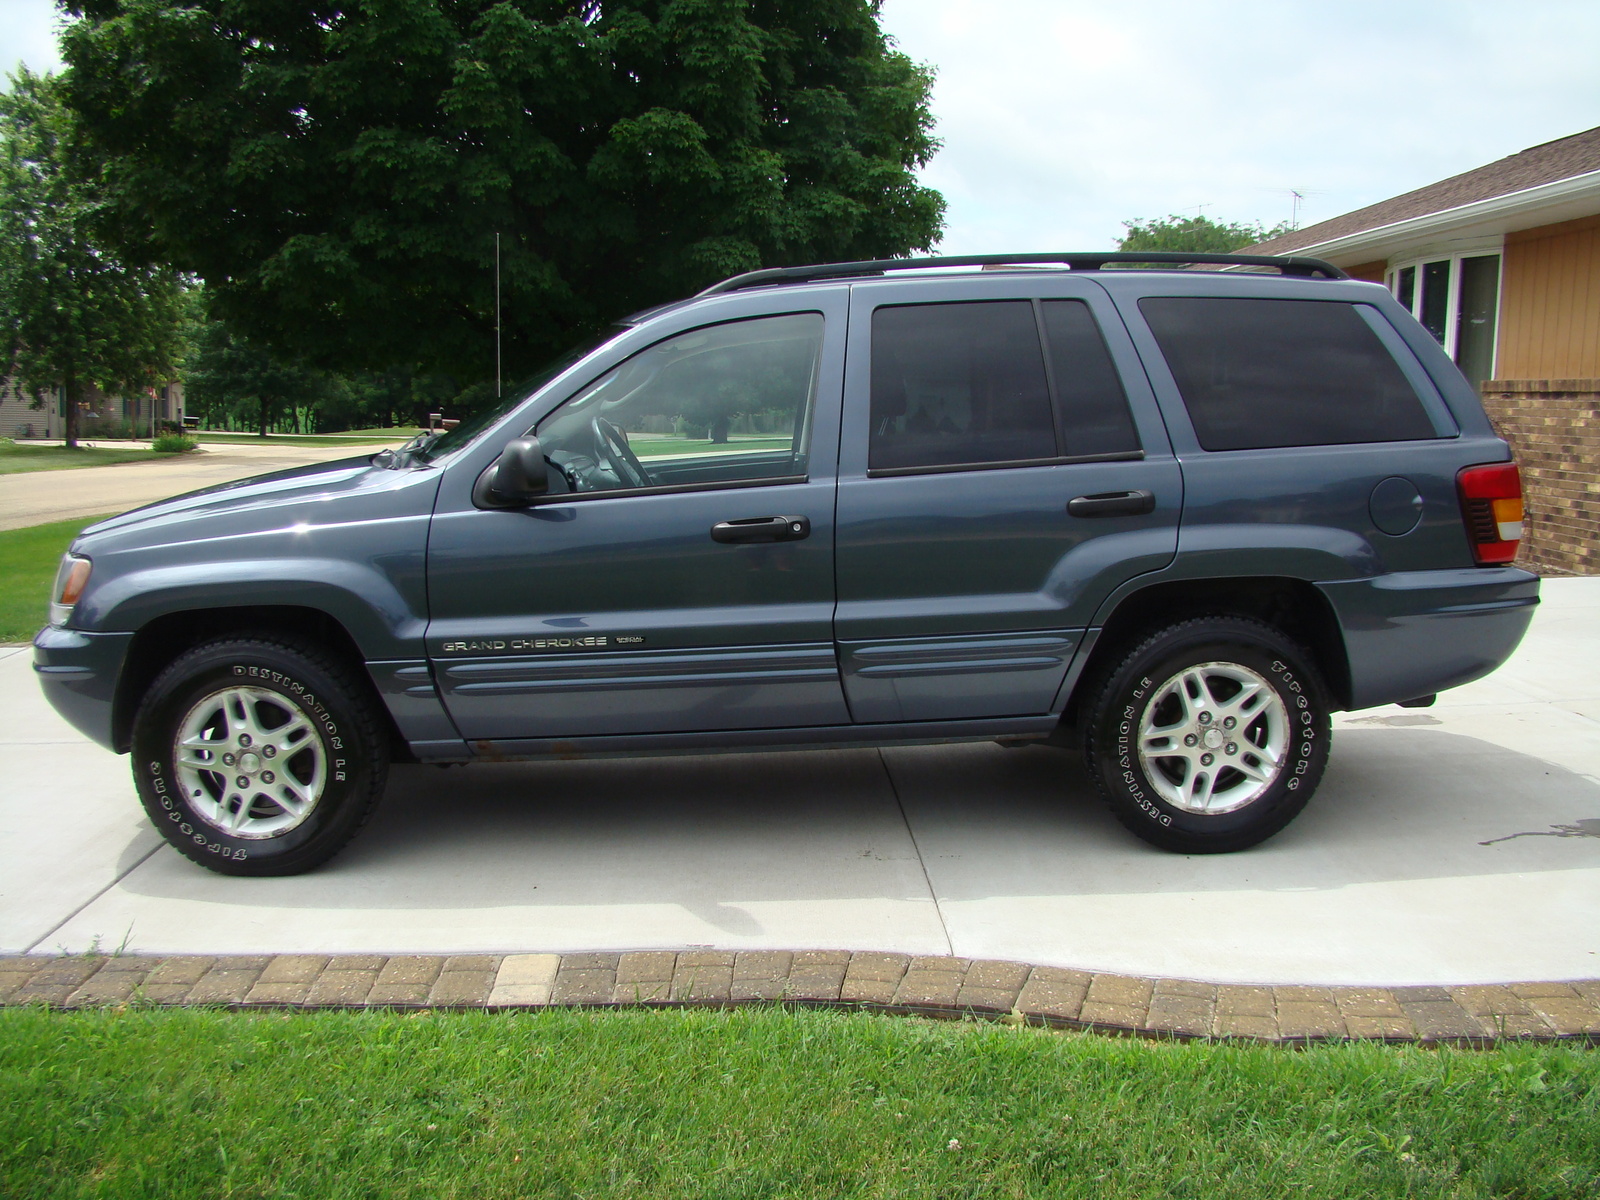 2002 Jeep grand cherokee special edition specs #5